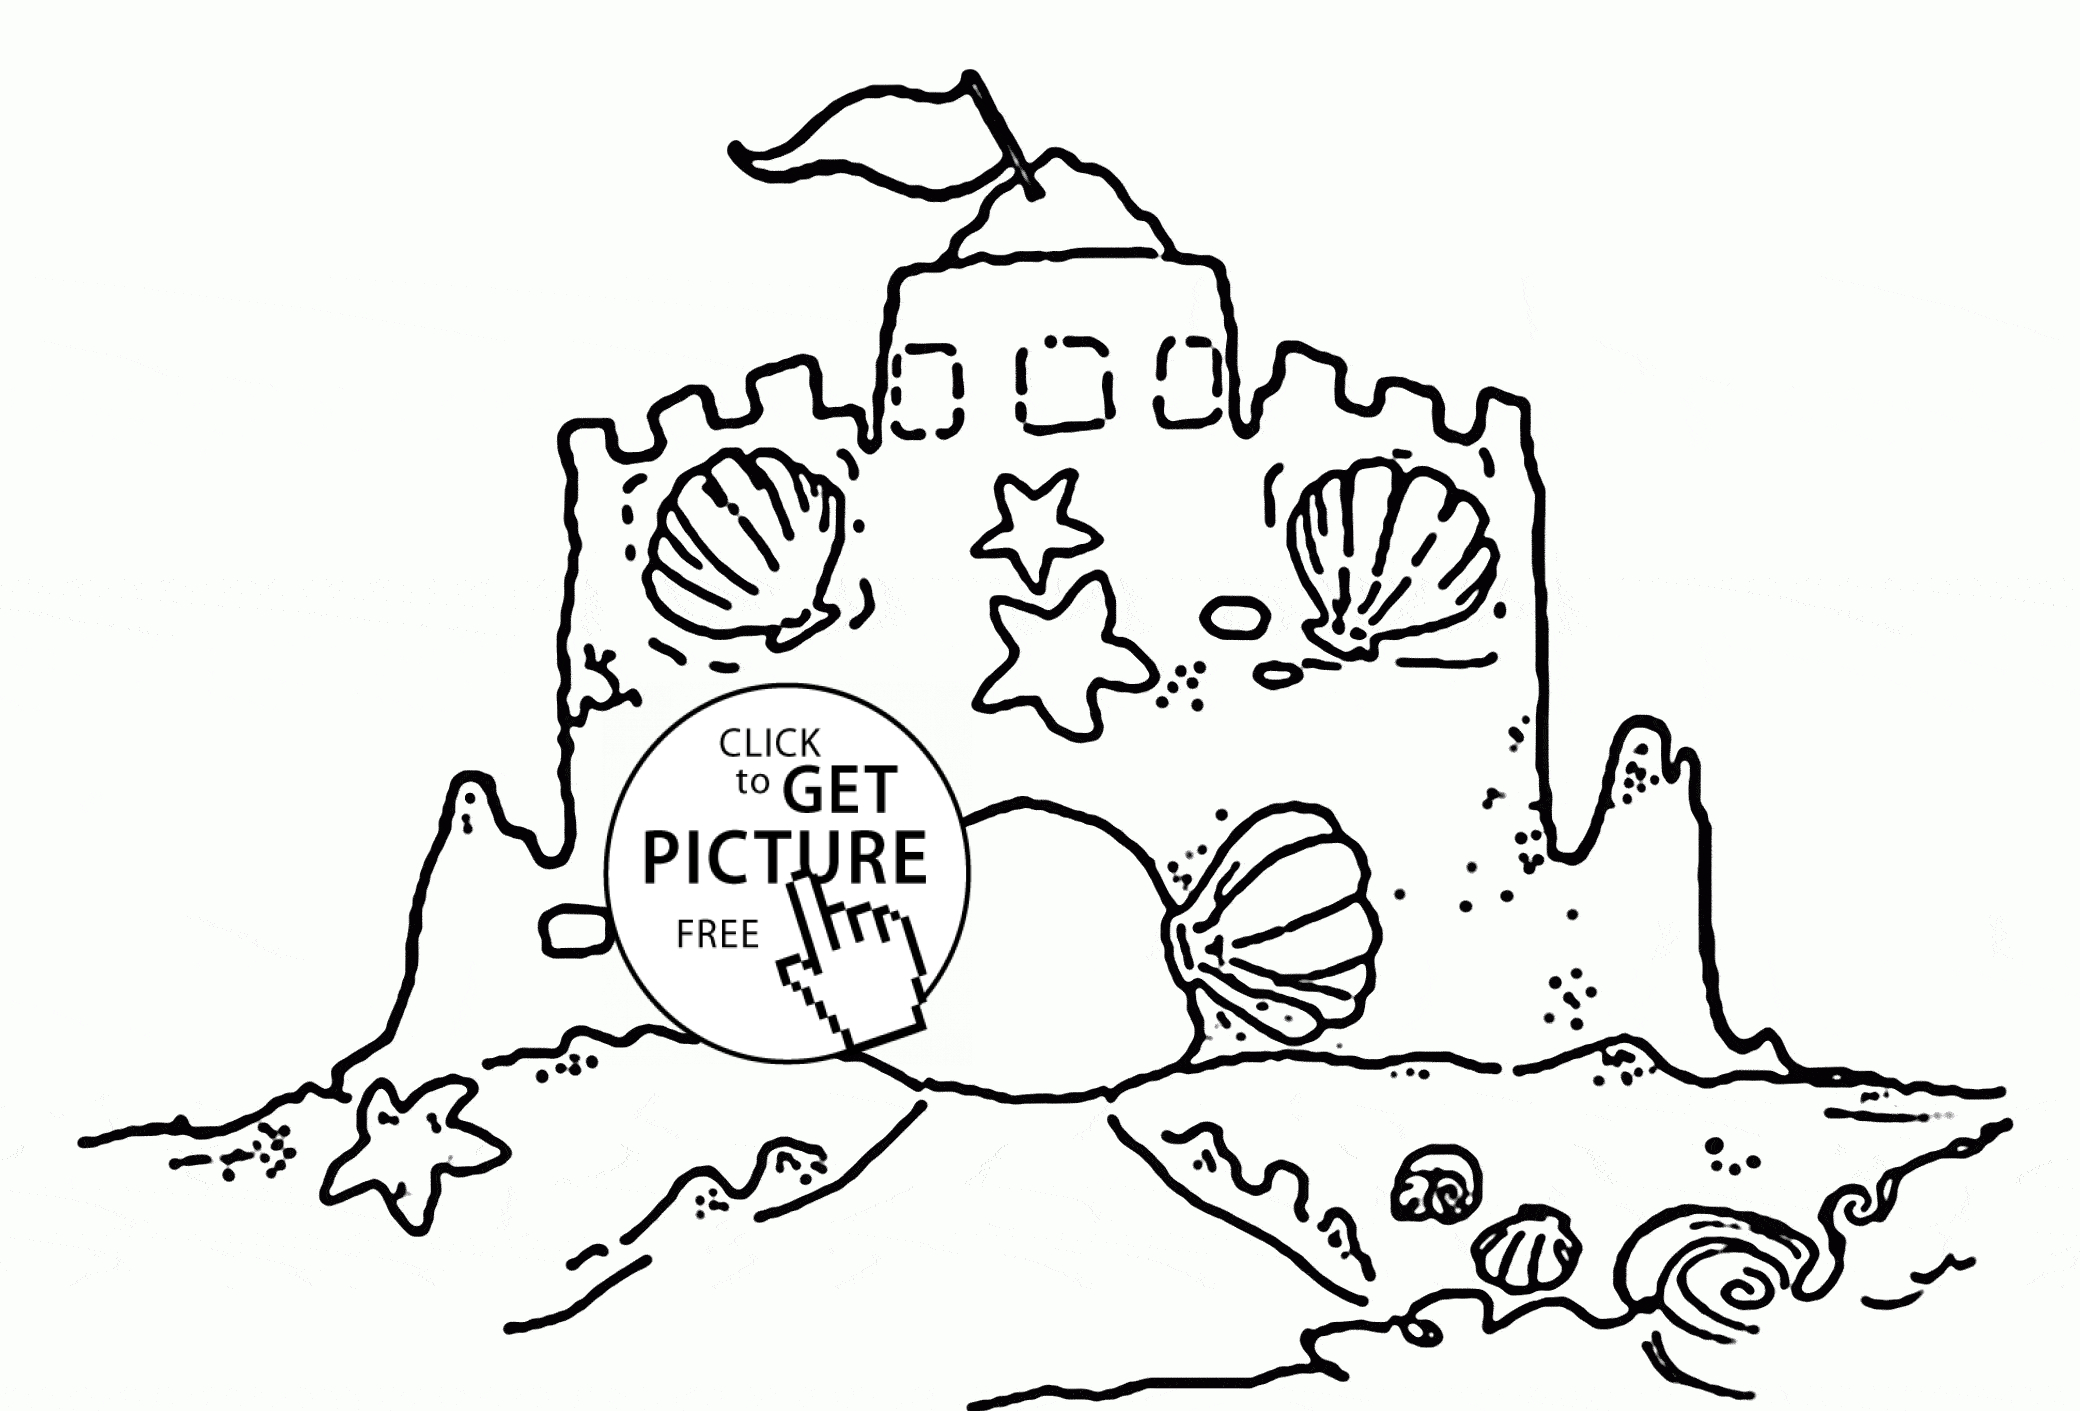 Summer Coloring Pages Free Sand Castle With A Clamshell Coloring Page For Kids Summer Coloring